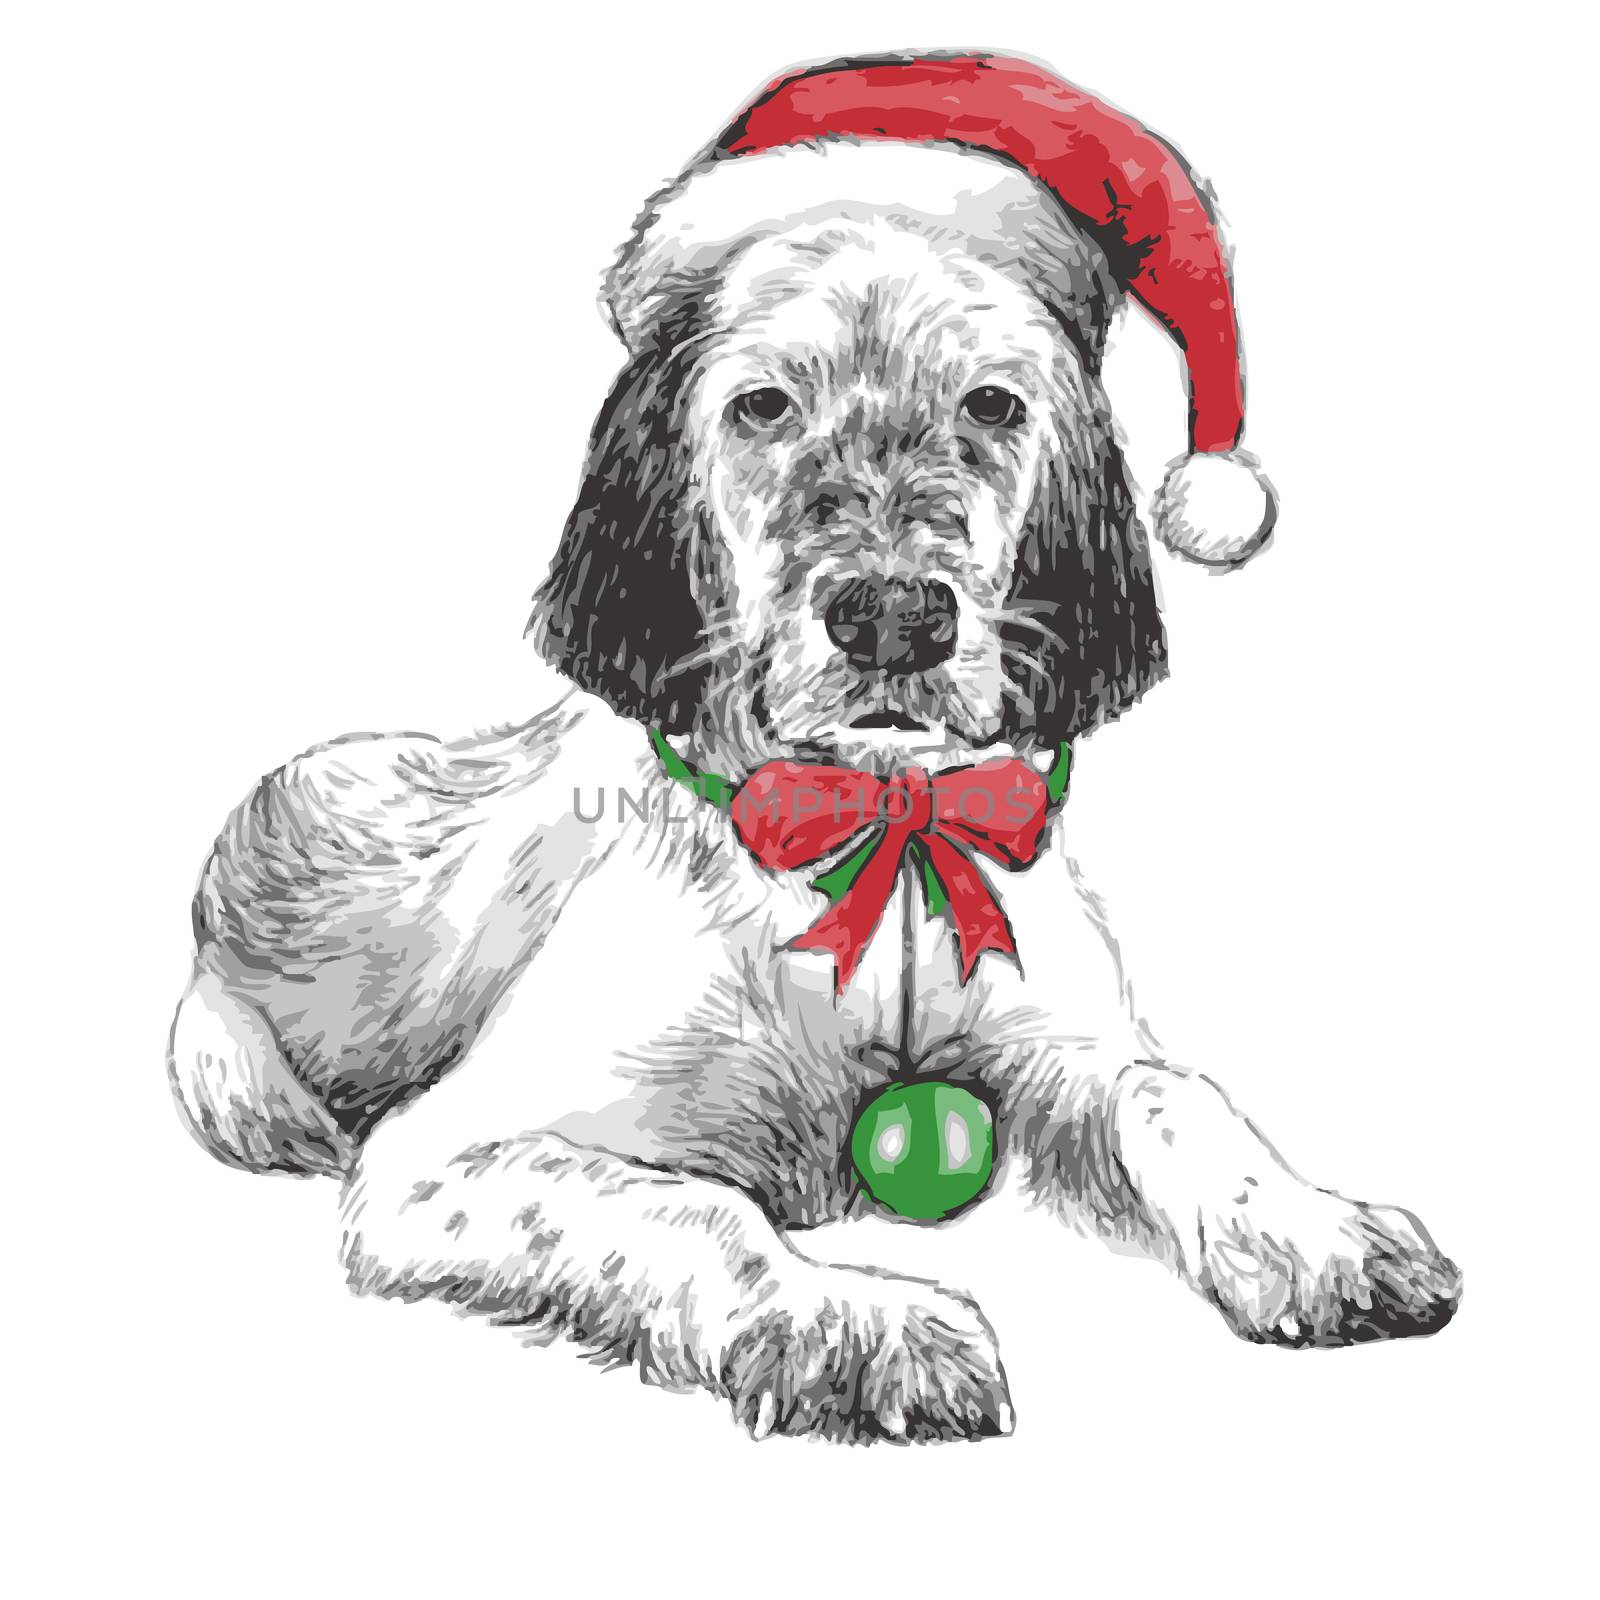 English setter with christmas hat by simpleBE